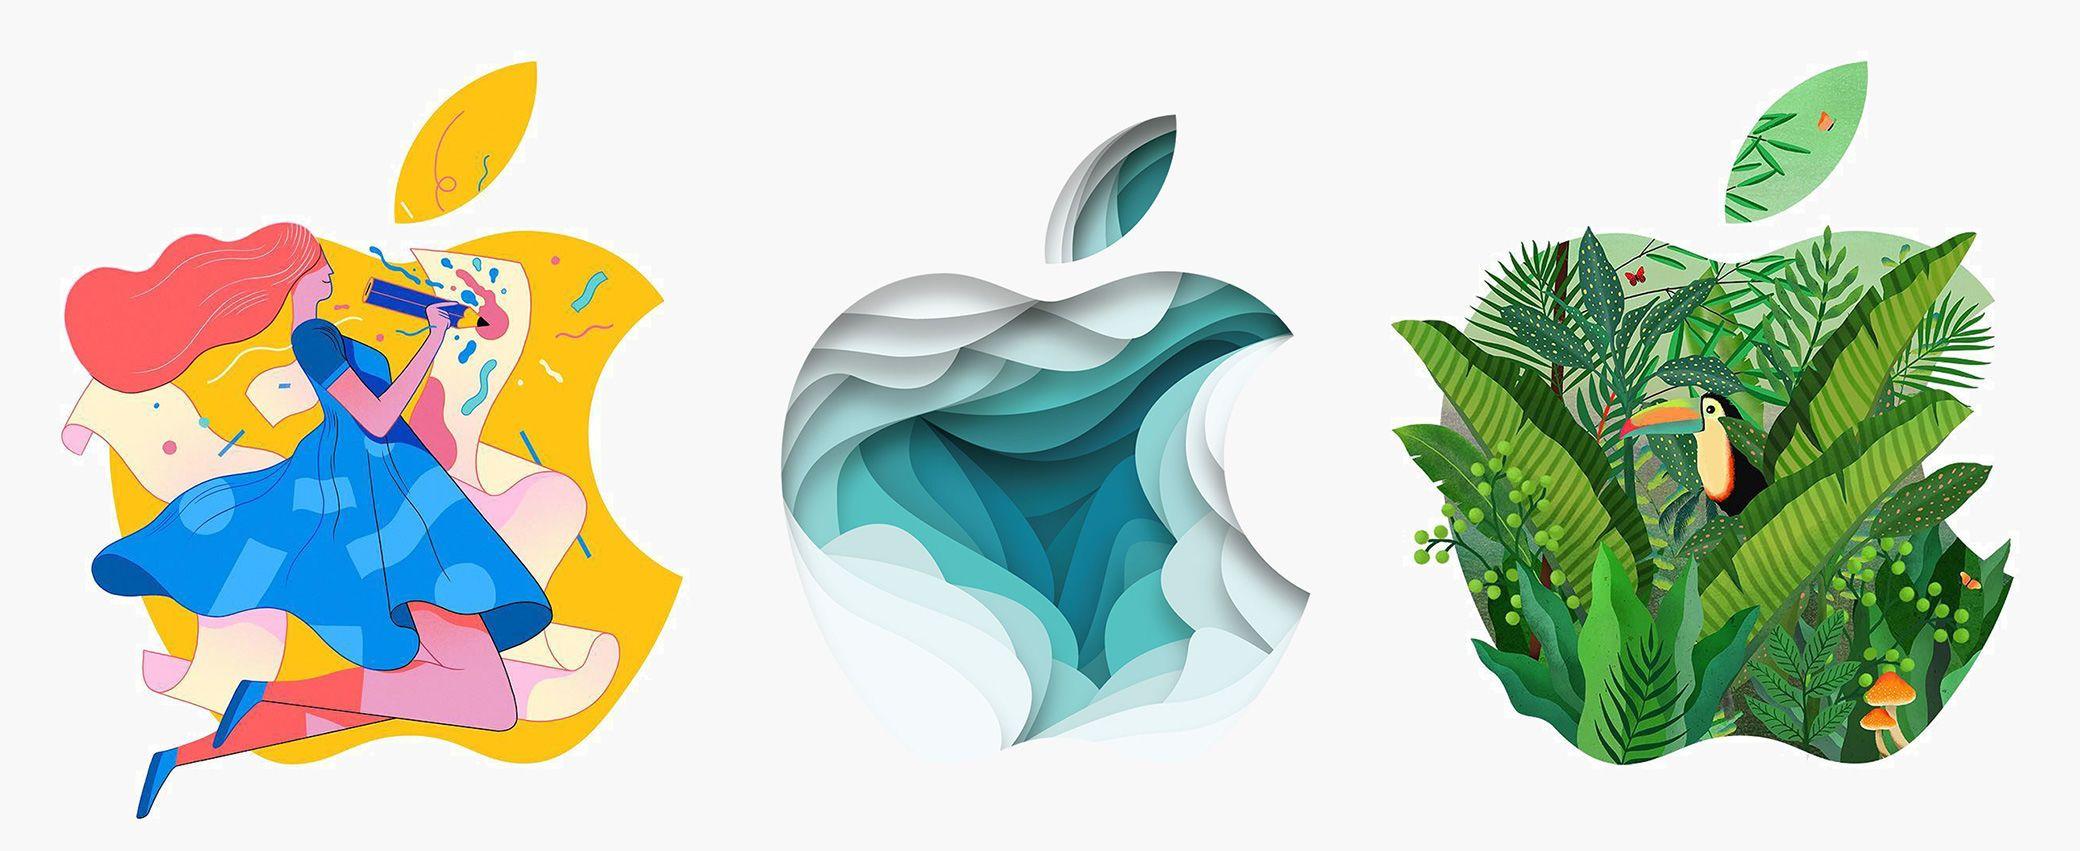 New Apple Logo - These artists reimagined the Apple logo for the new iPad Pro launch ...